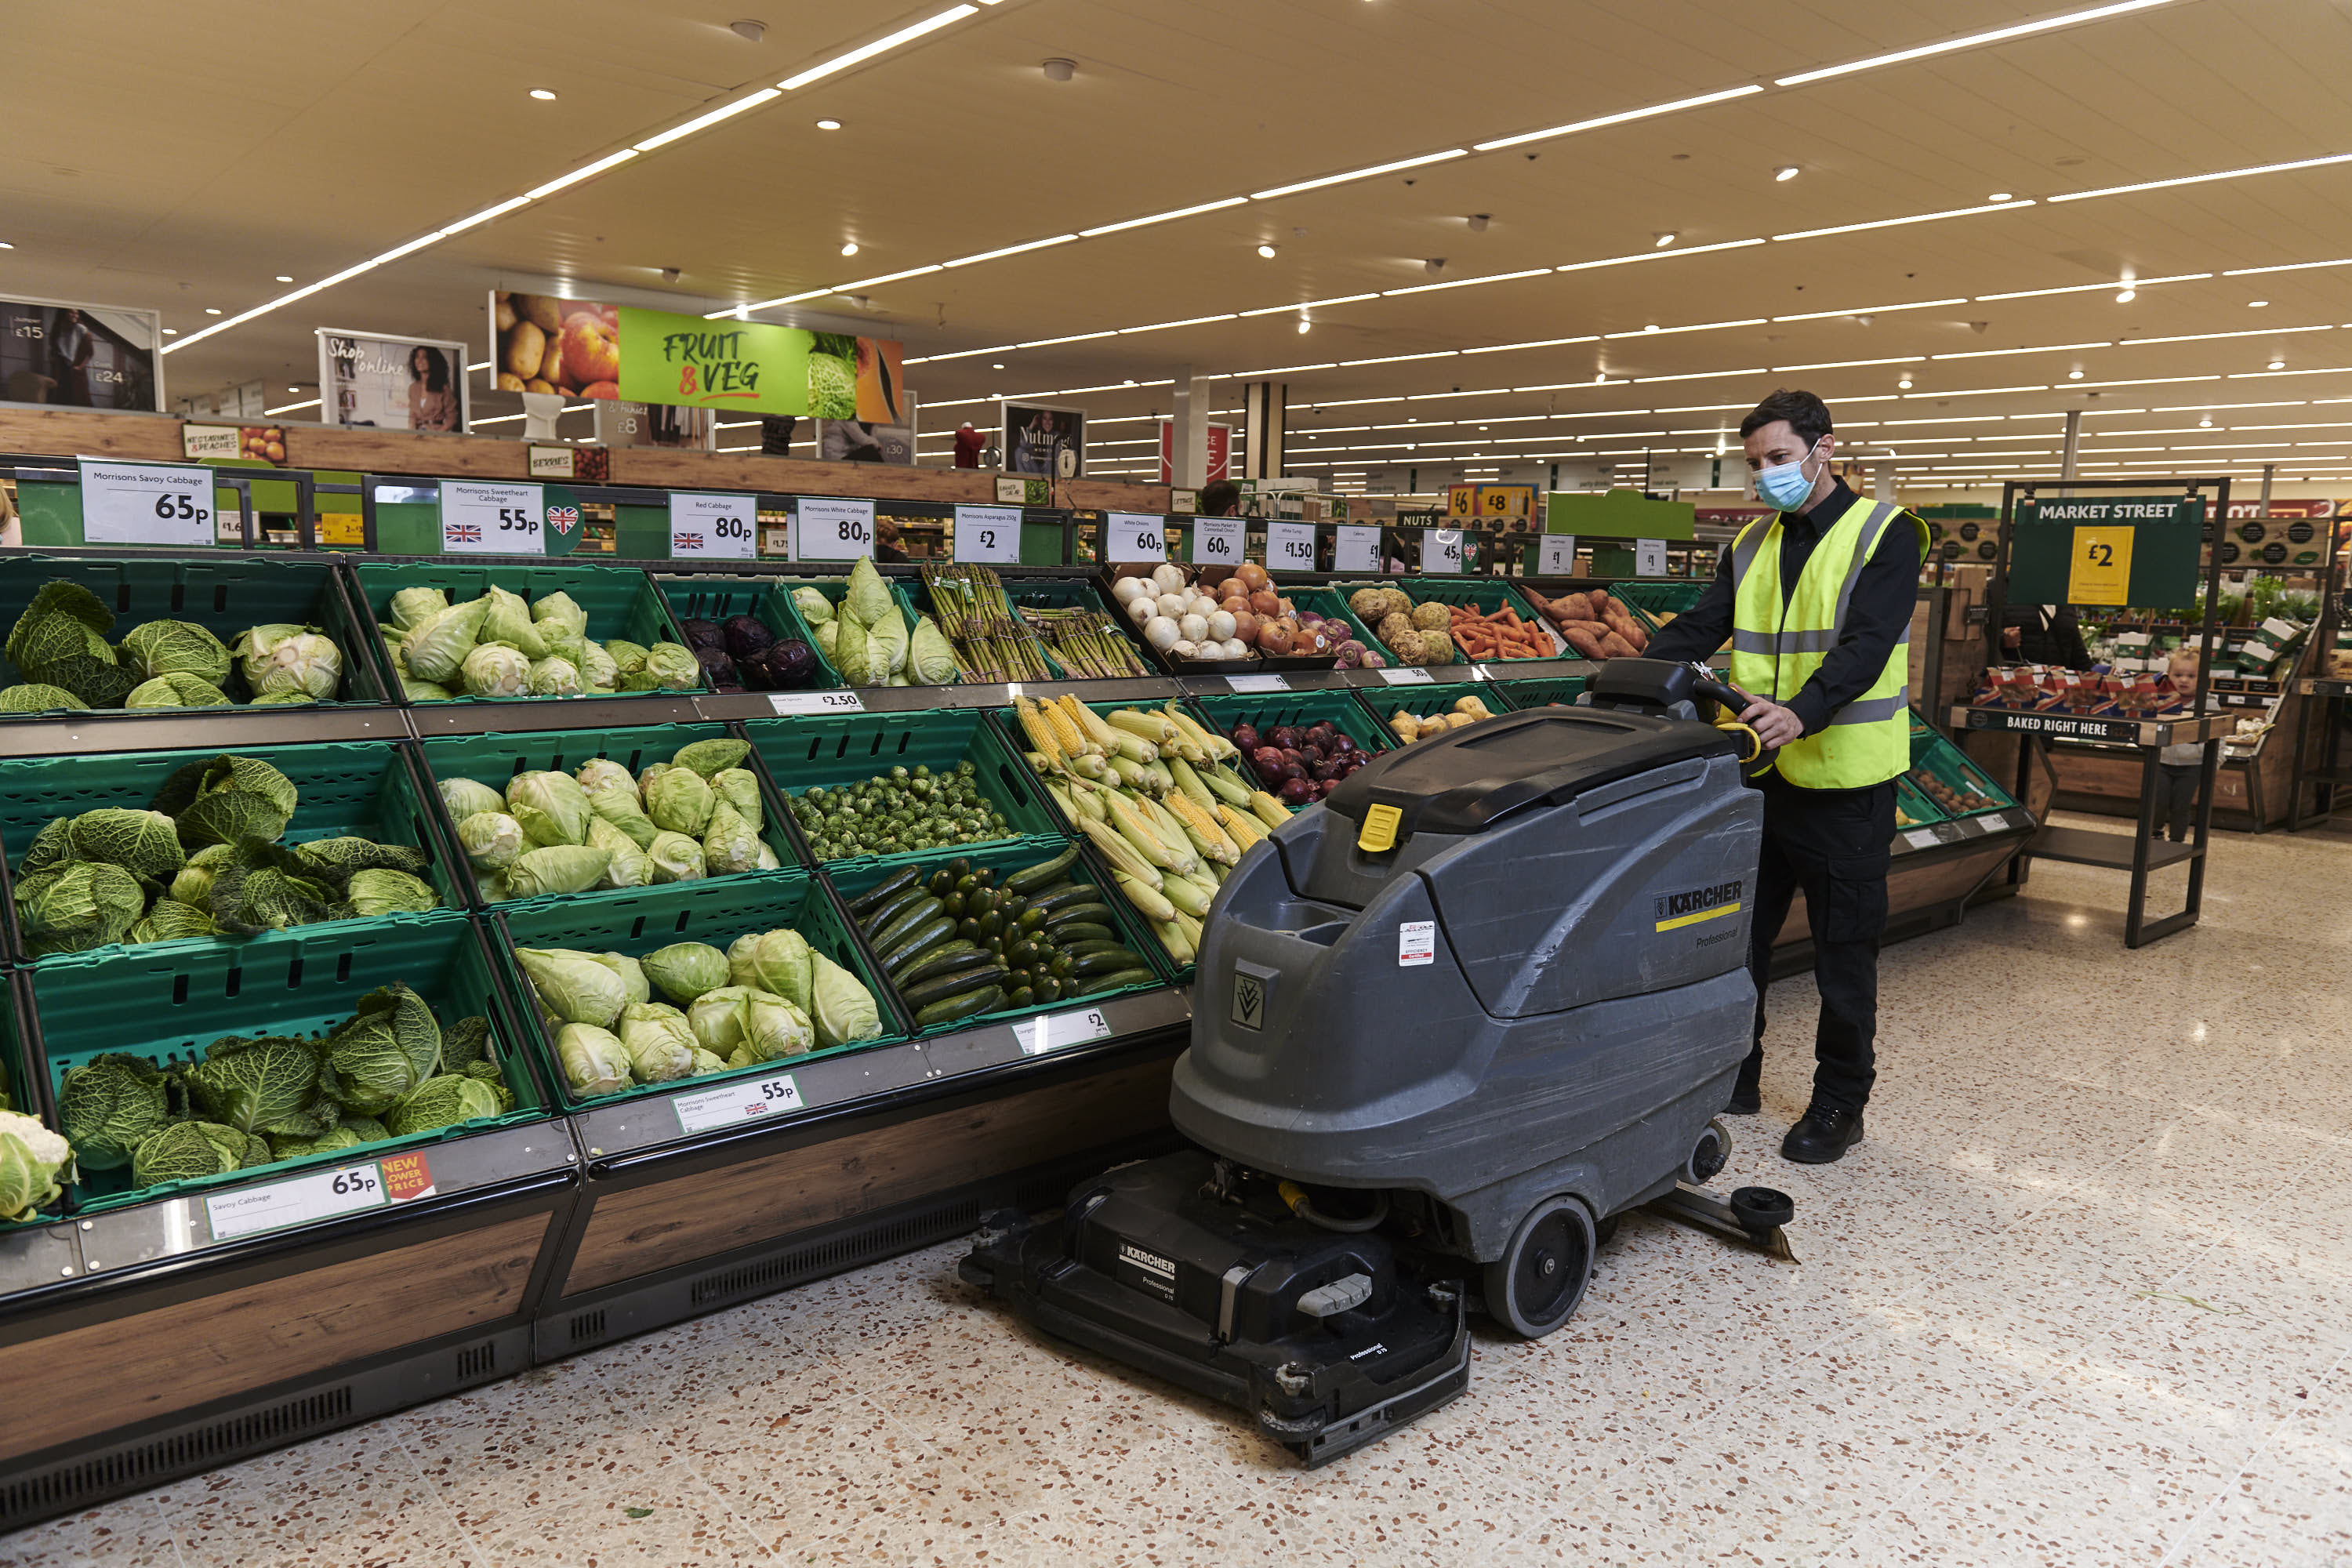 Morrisons invests to further increase instore hygiene standards